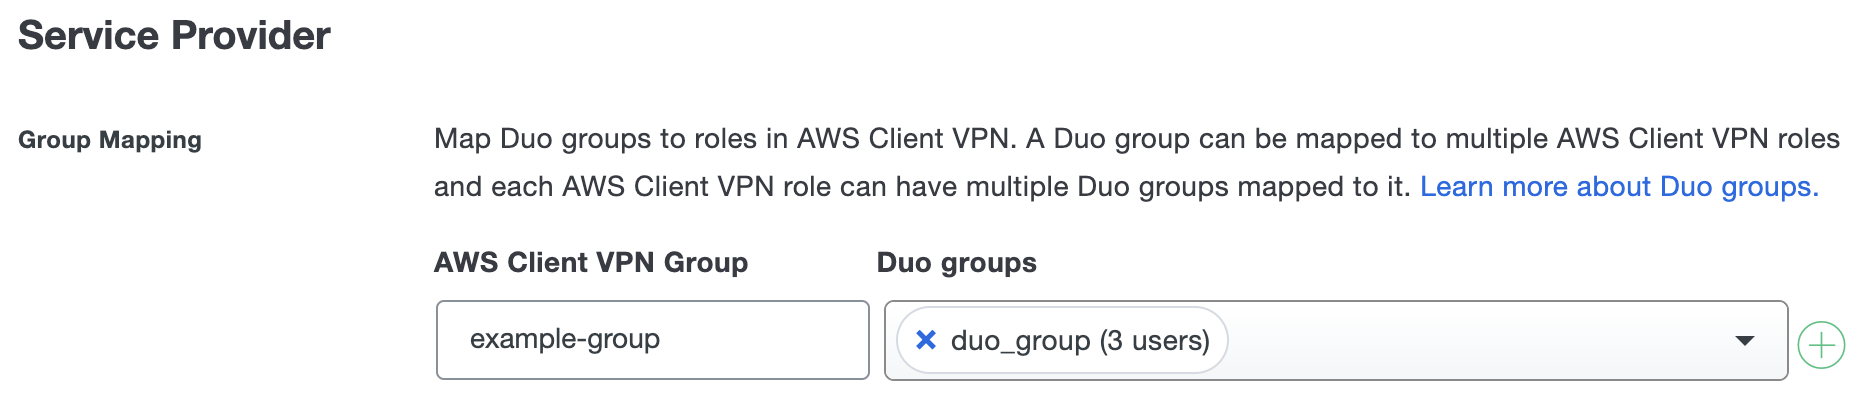 Duo AWS Client VPN Group Mapping Fields